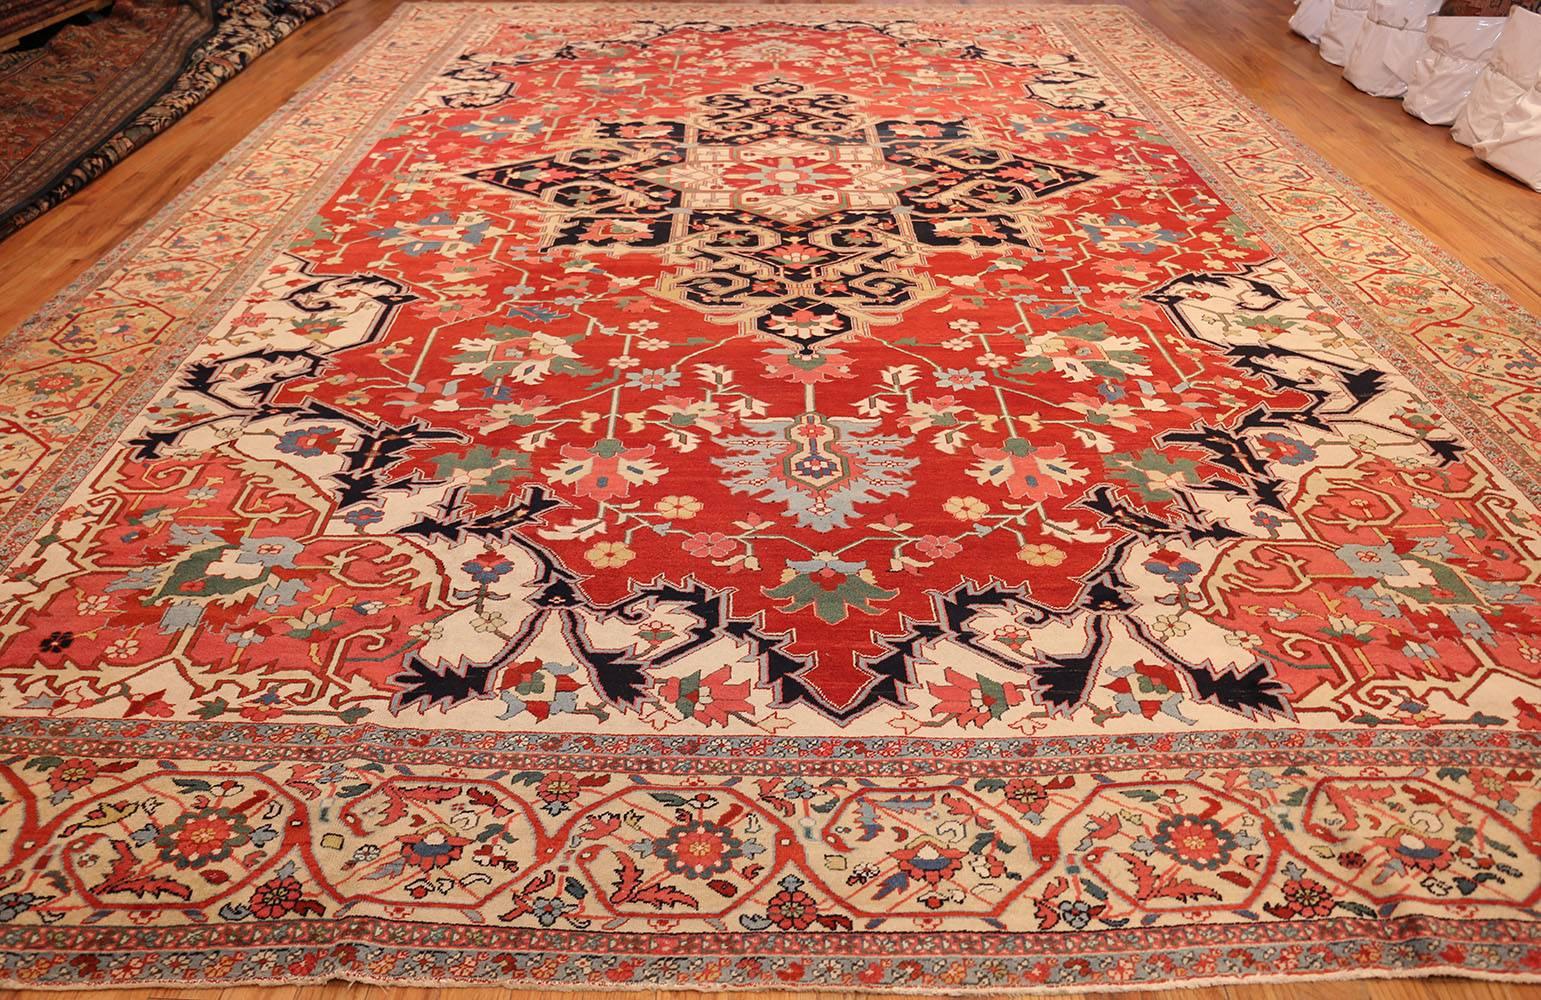 Nazmiyal Collection Antique Persian Serapi Rug. Size: 12 ft. 3 in x 17 ft. 9 in 2